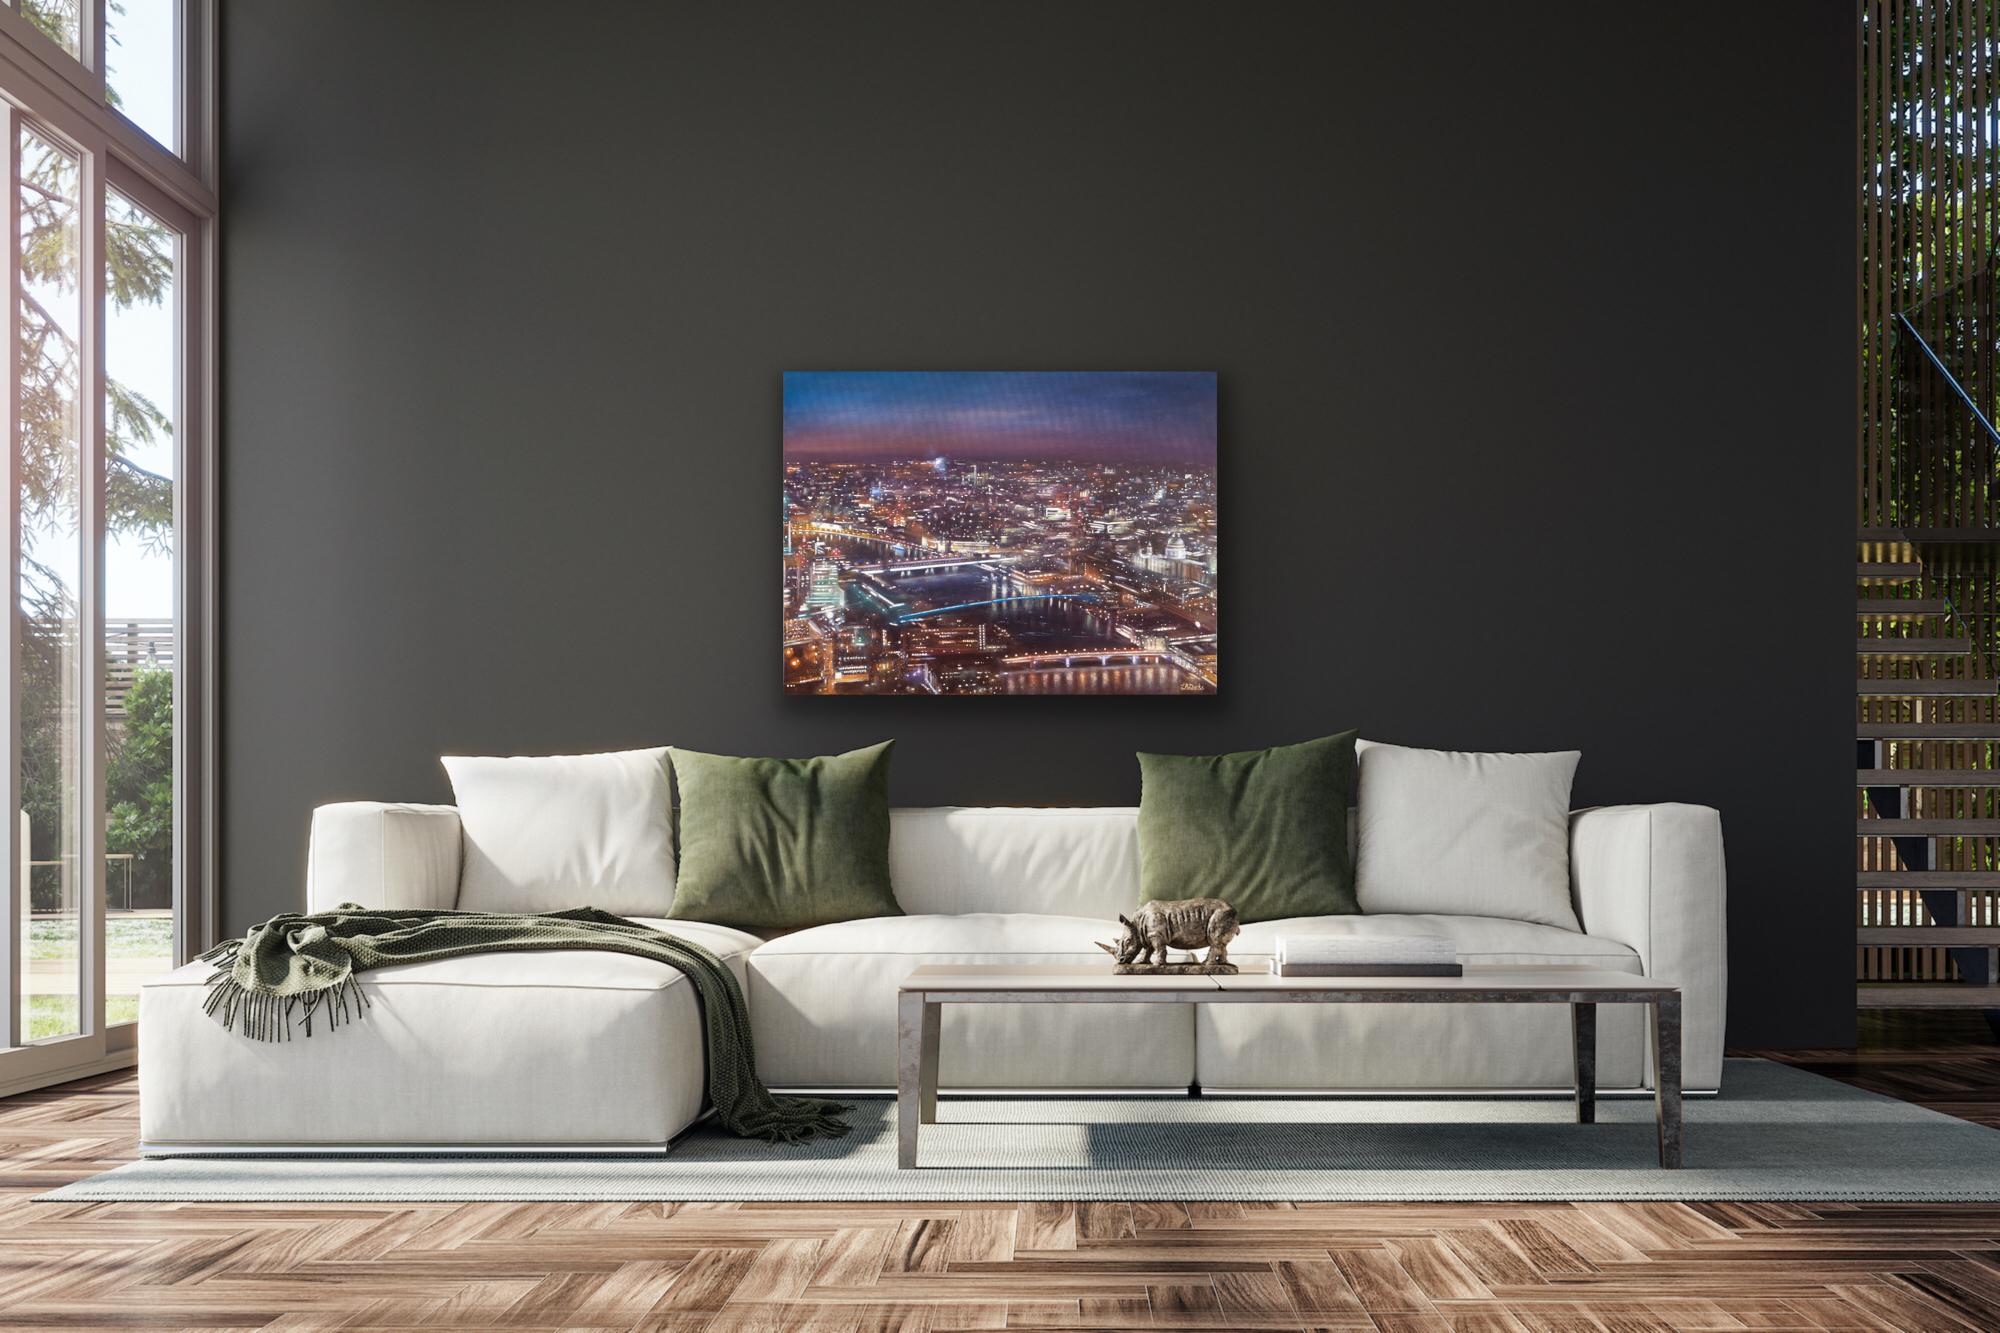 This painting is a view of St. Paul’s cathedral from The Shard. I love how this composition incorporates many bridges and St. Paul’s Cathedral at night.

Discover more original artwork by Lesley Anne Derks with Wychwood Art online and in our